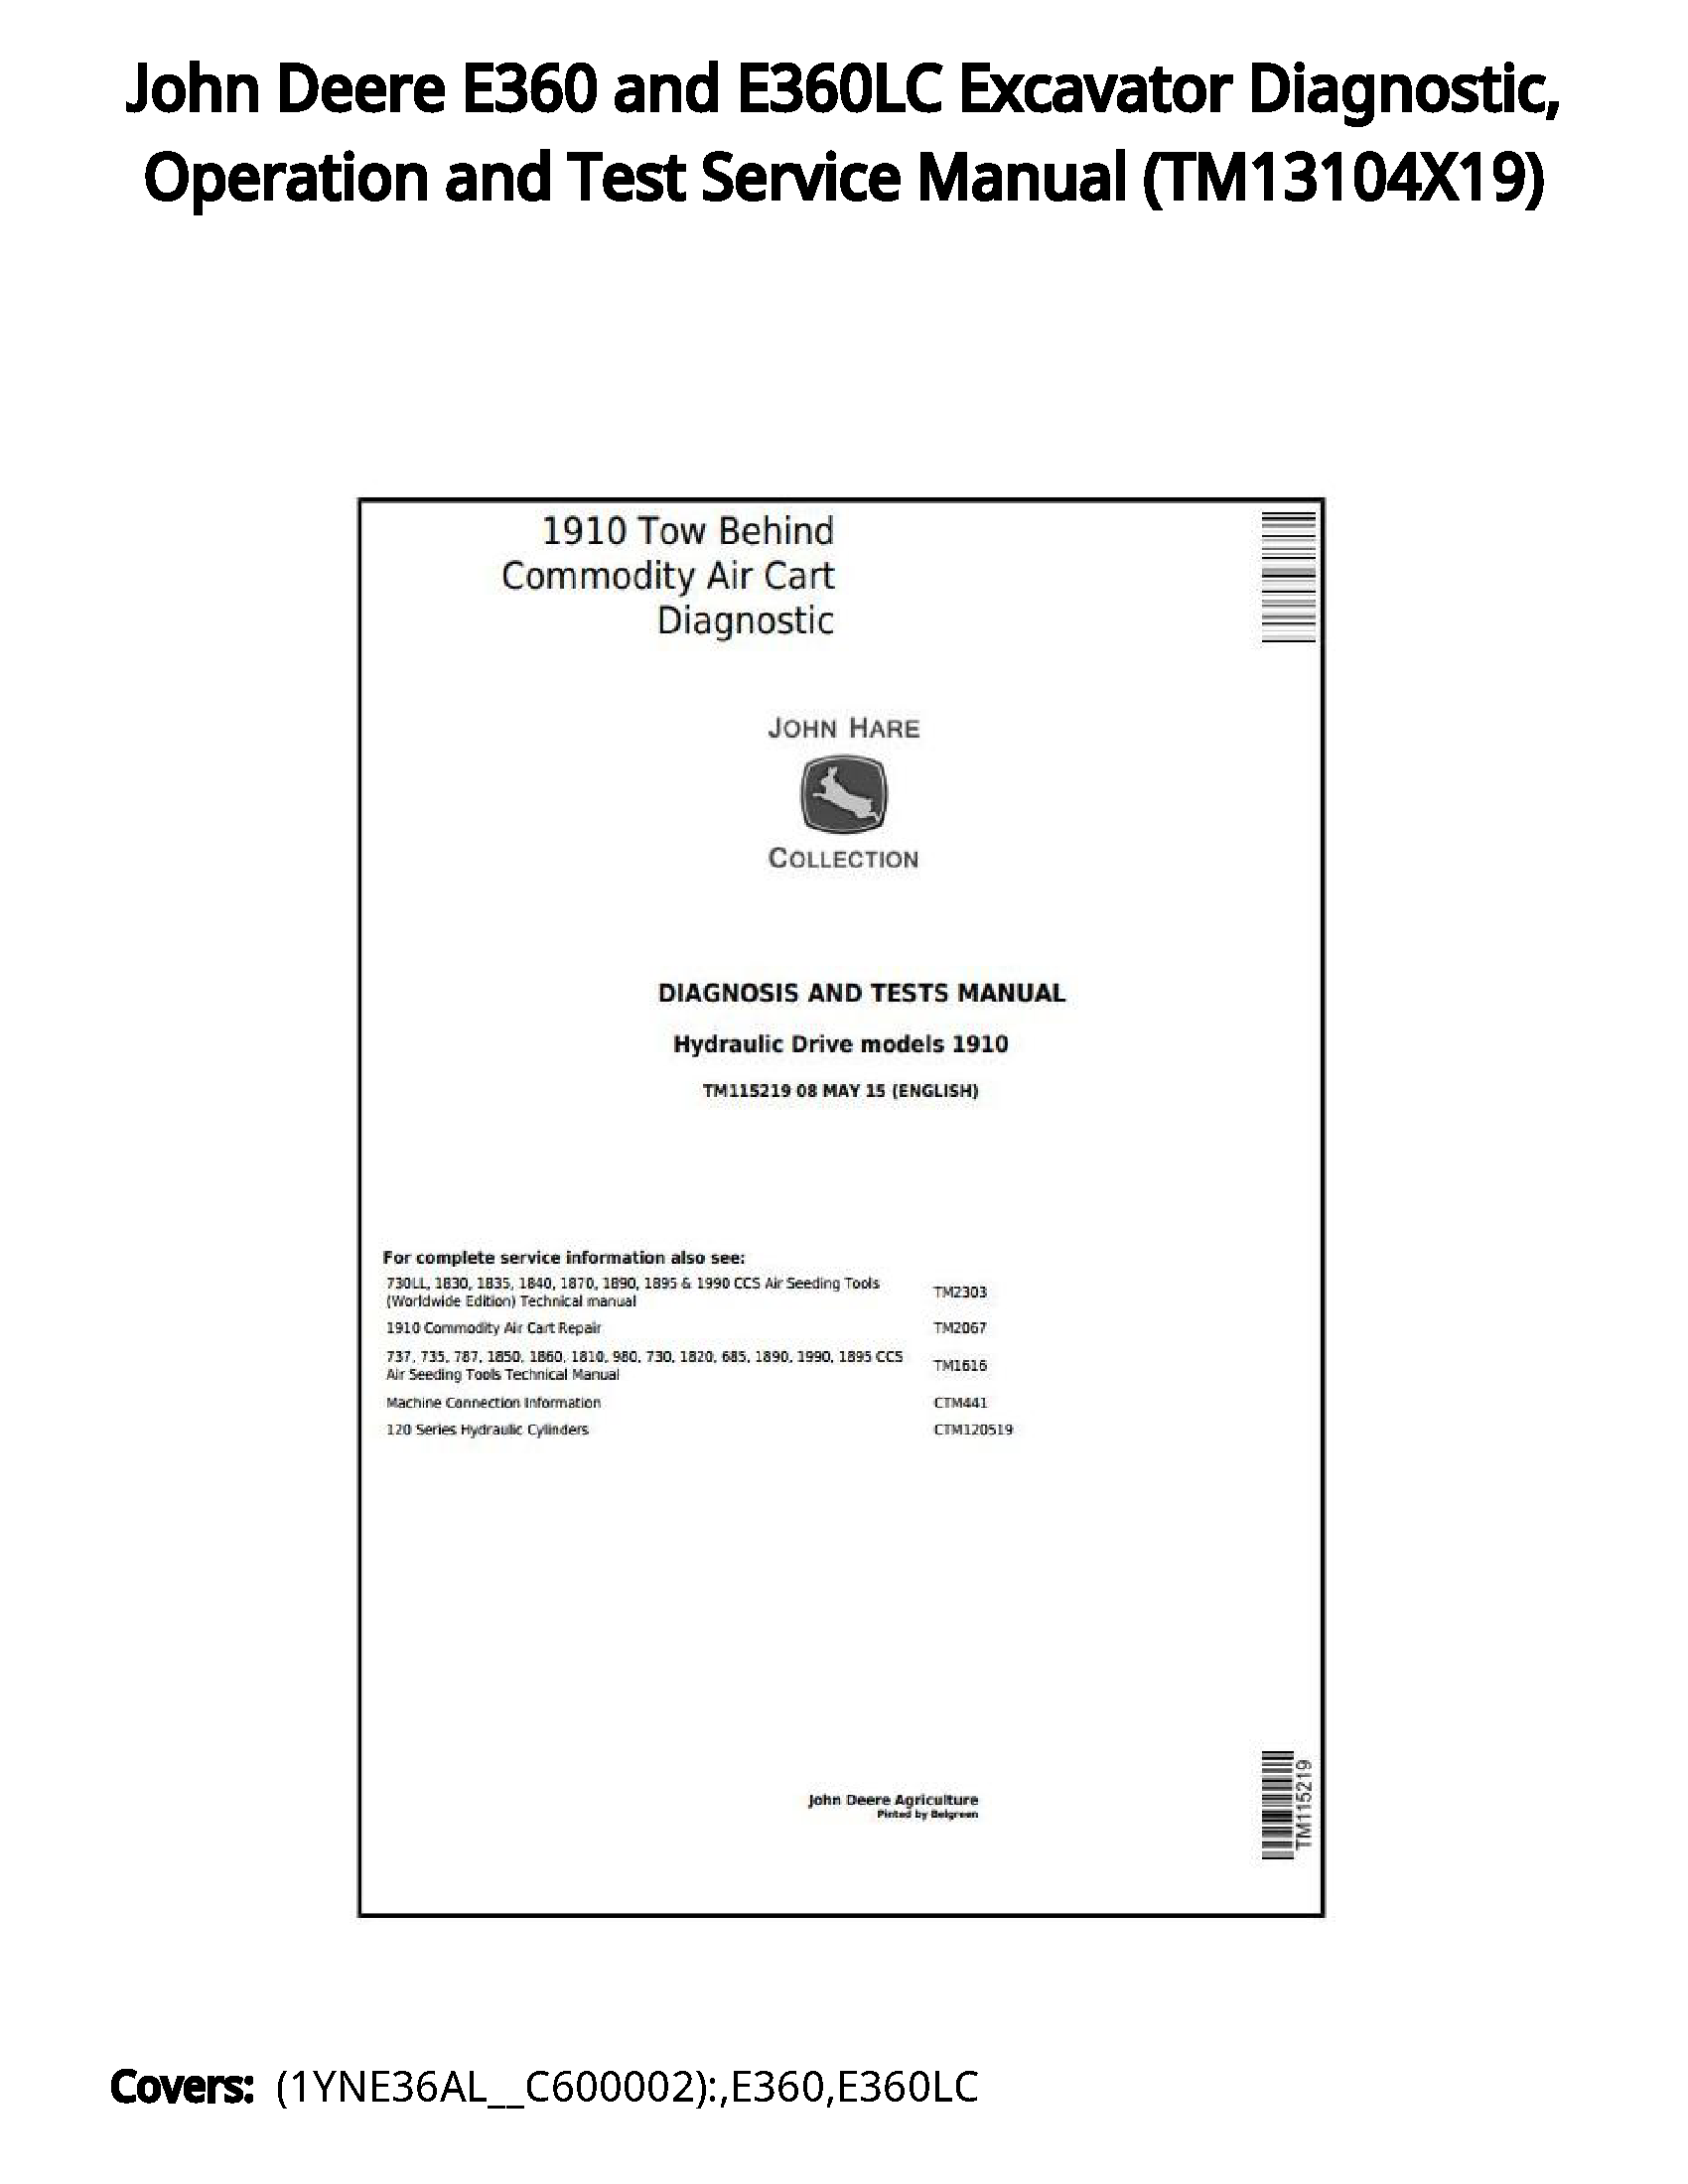 John Deere E360 and E360LC Excavator Diagnostic  Operation and Test Service Manual - TM13104X19